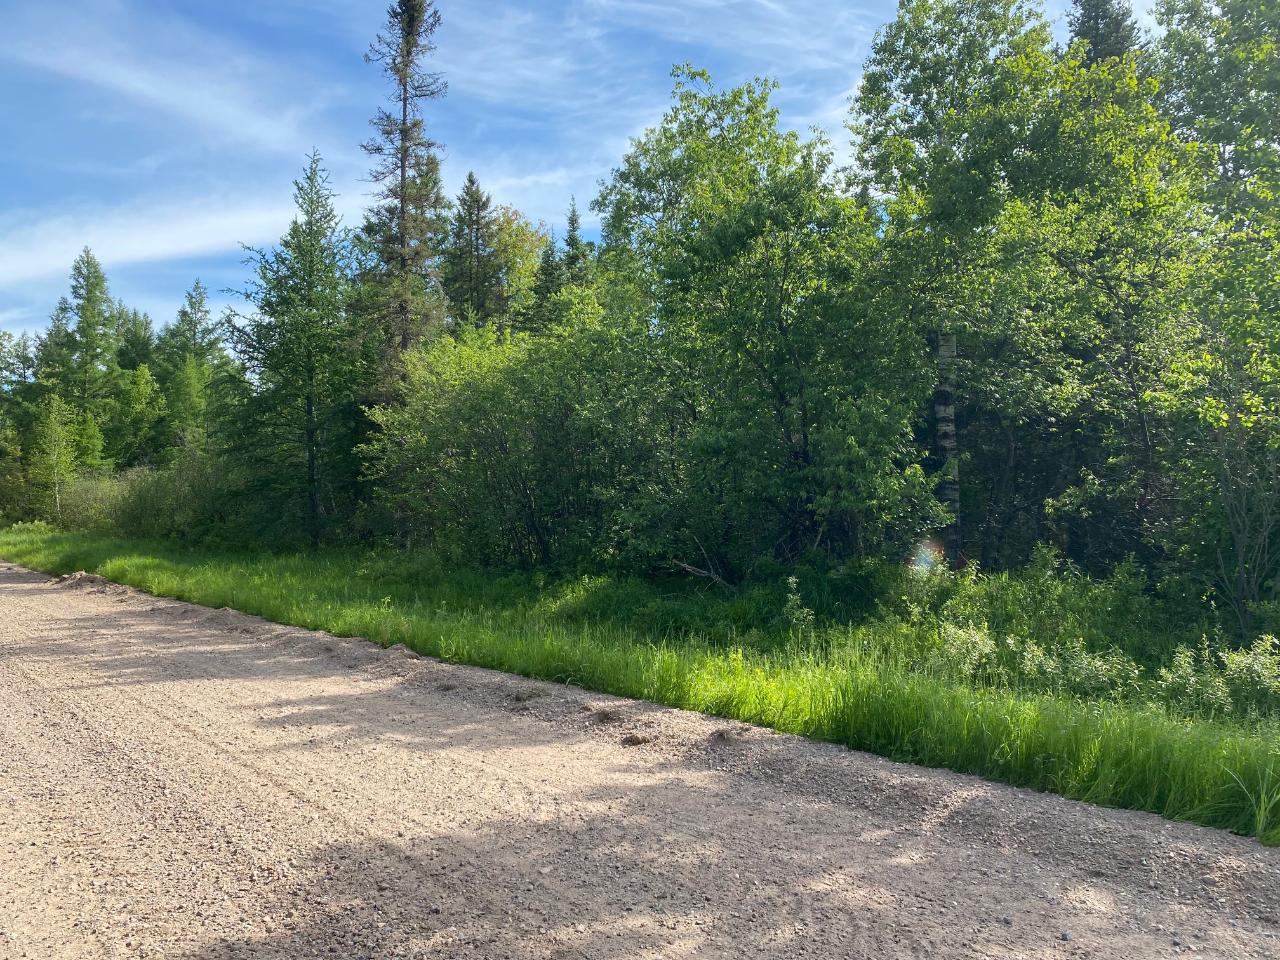 This 205 Acre Parcel is located 21 miles south of Rhinelander with one 40 on County CC and another 45 on County Line Rd. The 205 acres is all connected with a nice building spot on County CC. Silver Creek runs through one 40 with a nice mix of high and low land for the best hunting. This property is right in the middle of Antigo, Merrill, Rhinelander and Tomahawk. Build your dream home on this 205-acre parcel and hunt in your back yard. 0280284 0280281 0280280 0280275 0280279